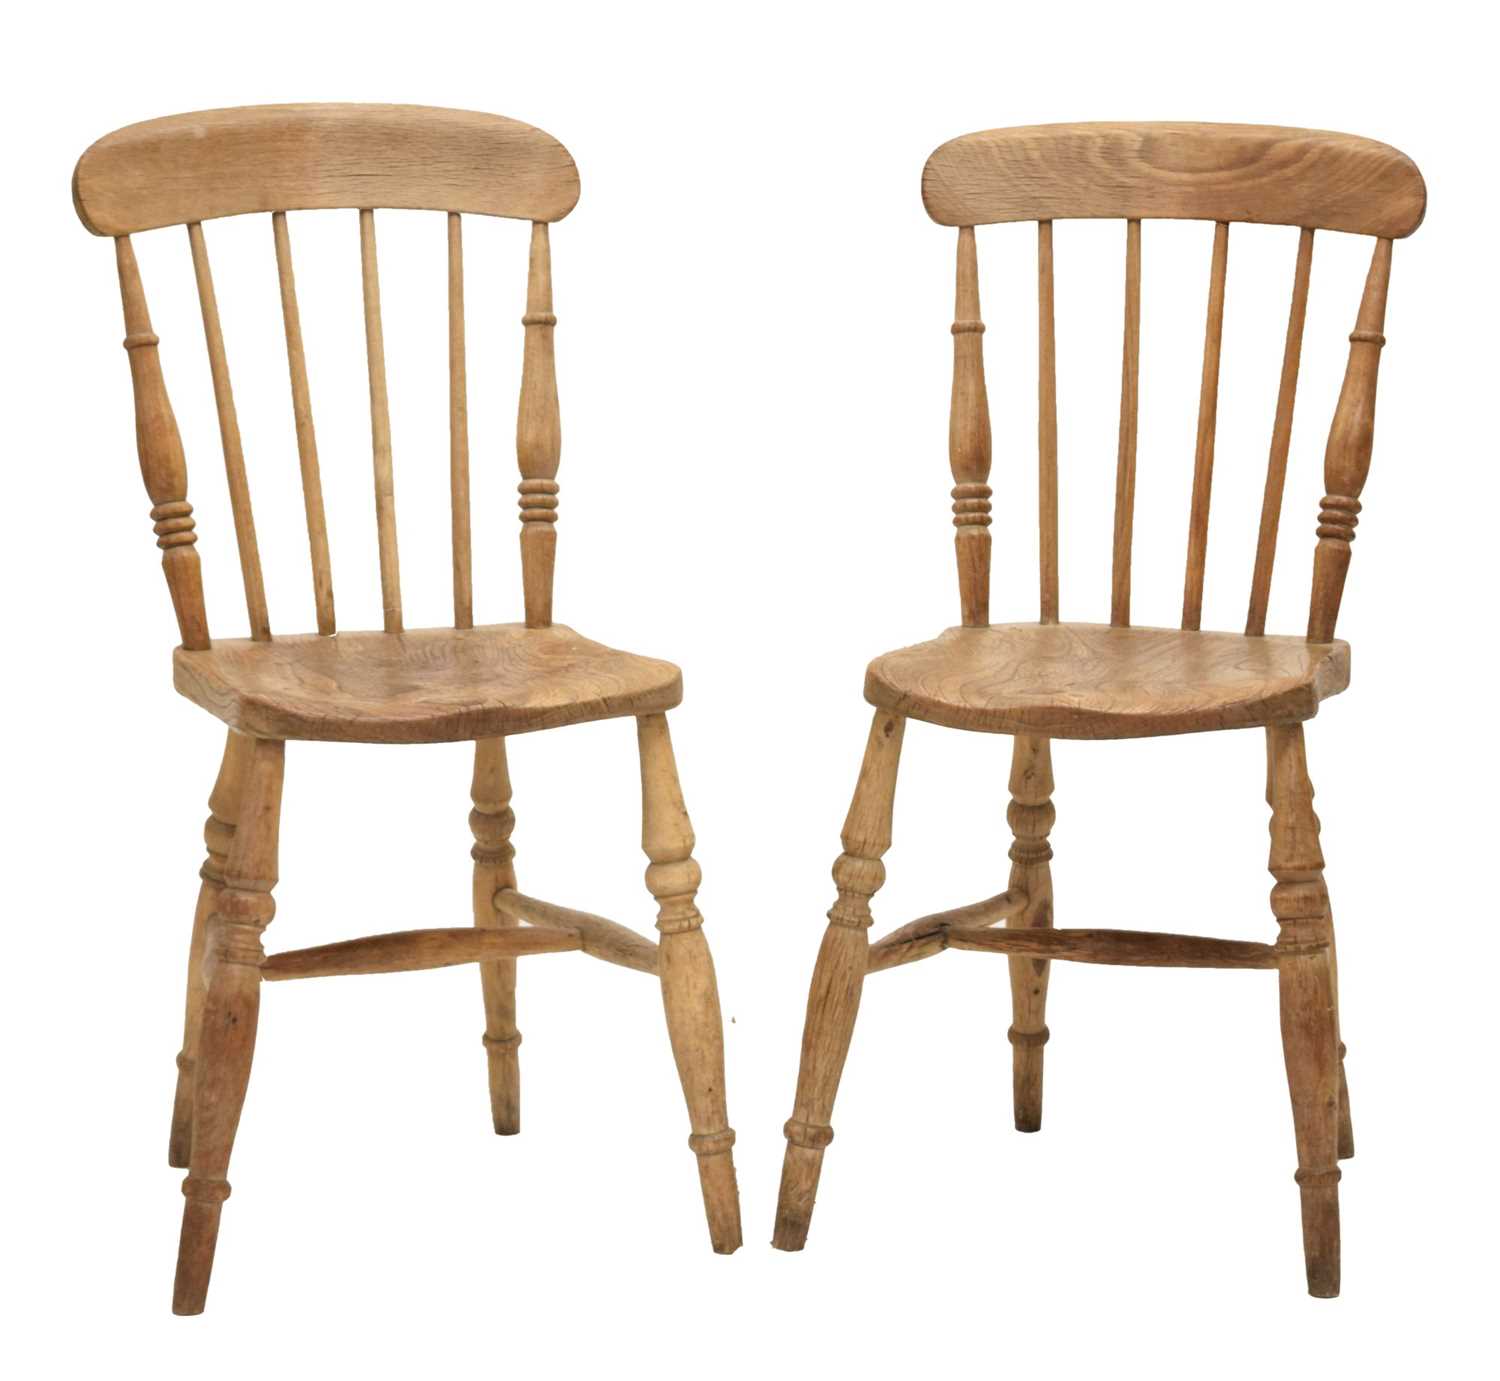 Pair of 19th century country stick back kitchen chairs